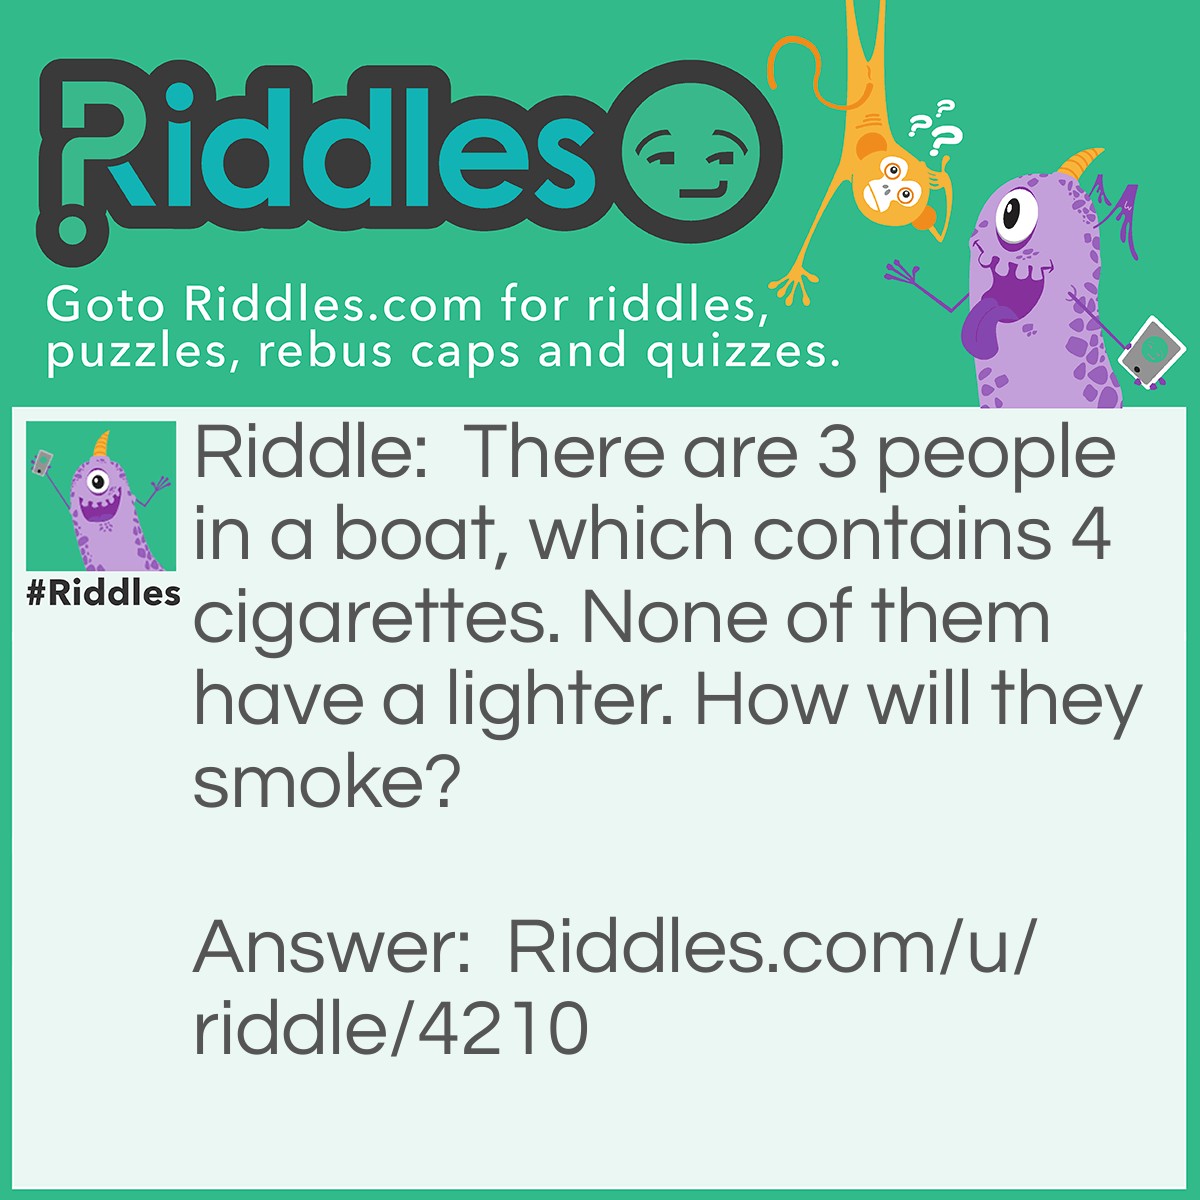 Riddle: There are 3 people in a boat, which contains 4 cigarettes. None of them have a lighter. How will they smoke? Answer: They would throw a cigarette out of the boat, so the boat becomes ONE CIGARETTE LIGHTER!